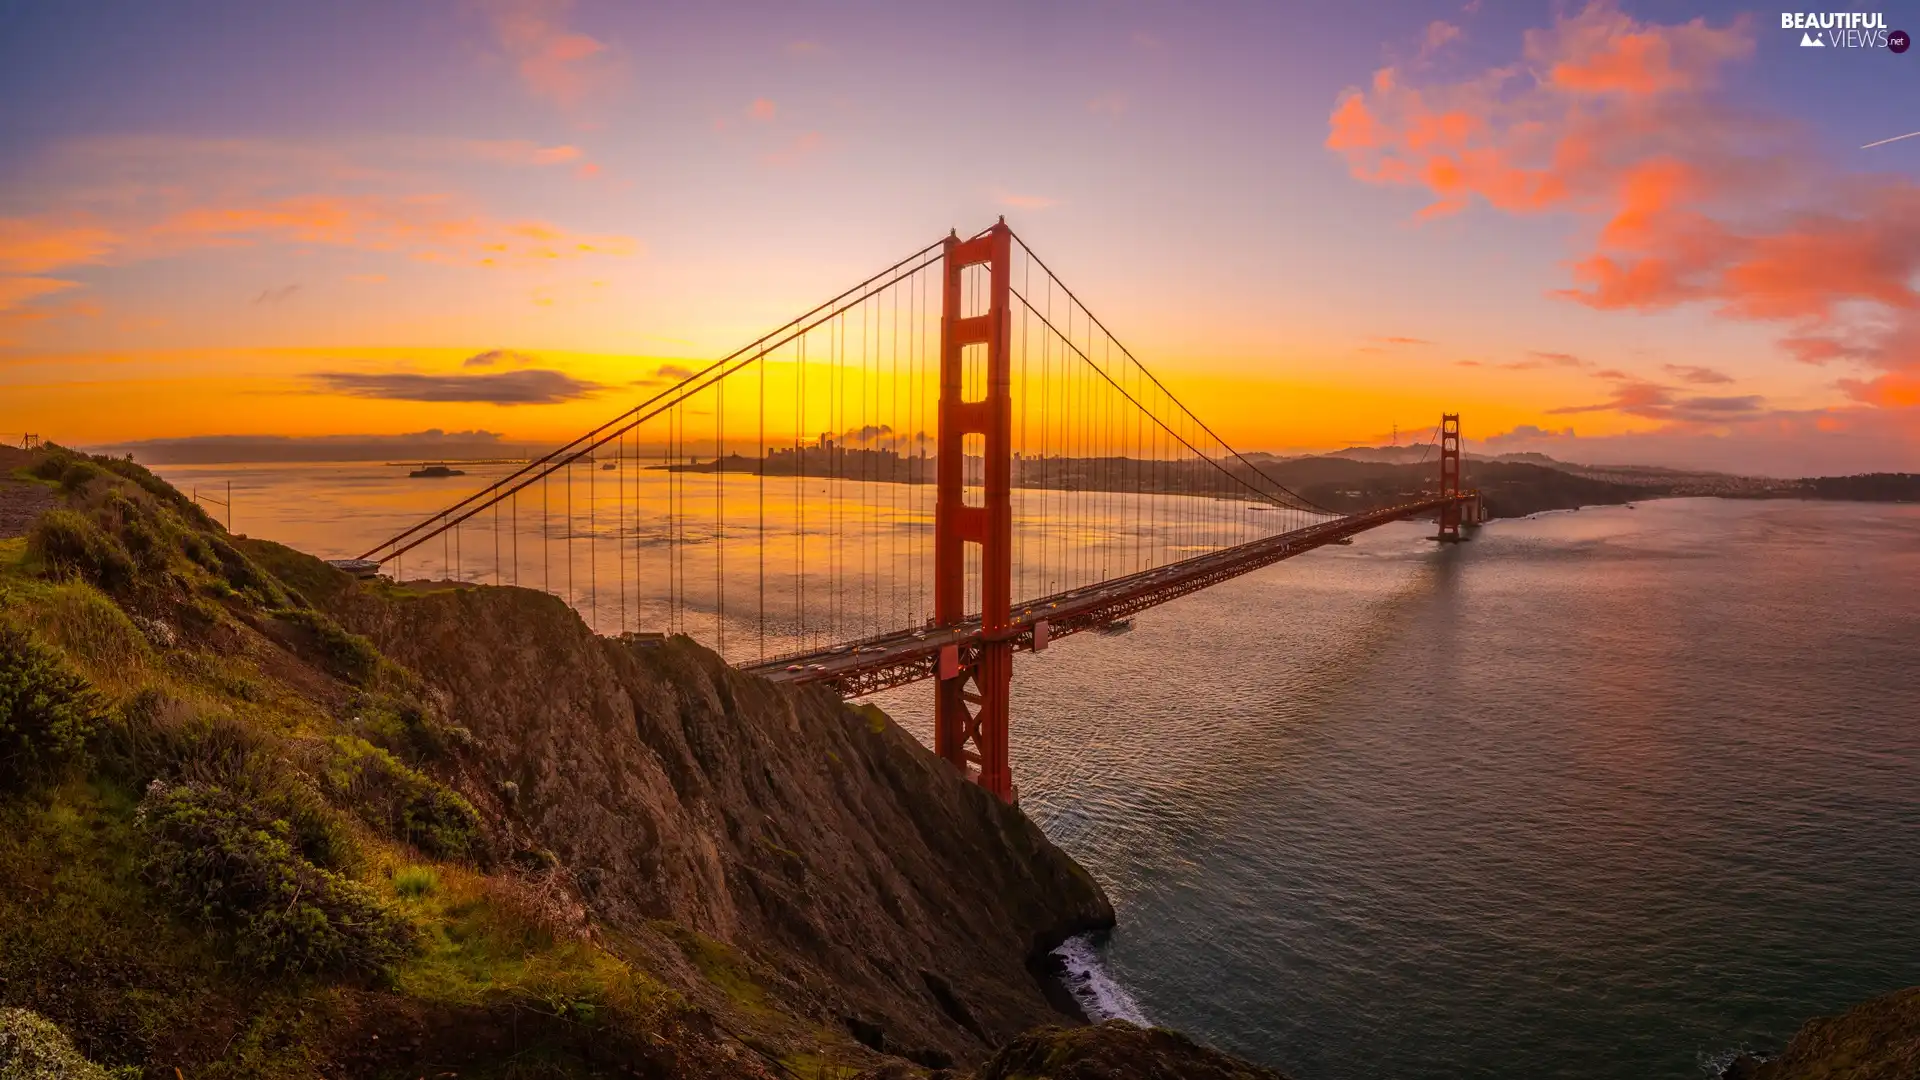 rocks, The United States, Golden Gate Strait, Great Sunsets, Most Golden Gate Bridge, State of California